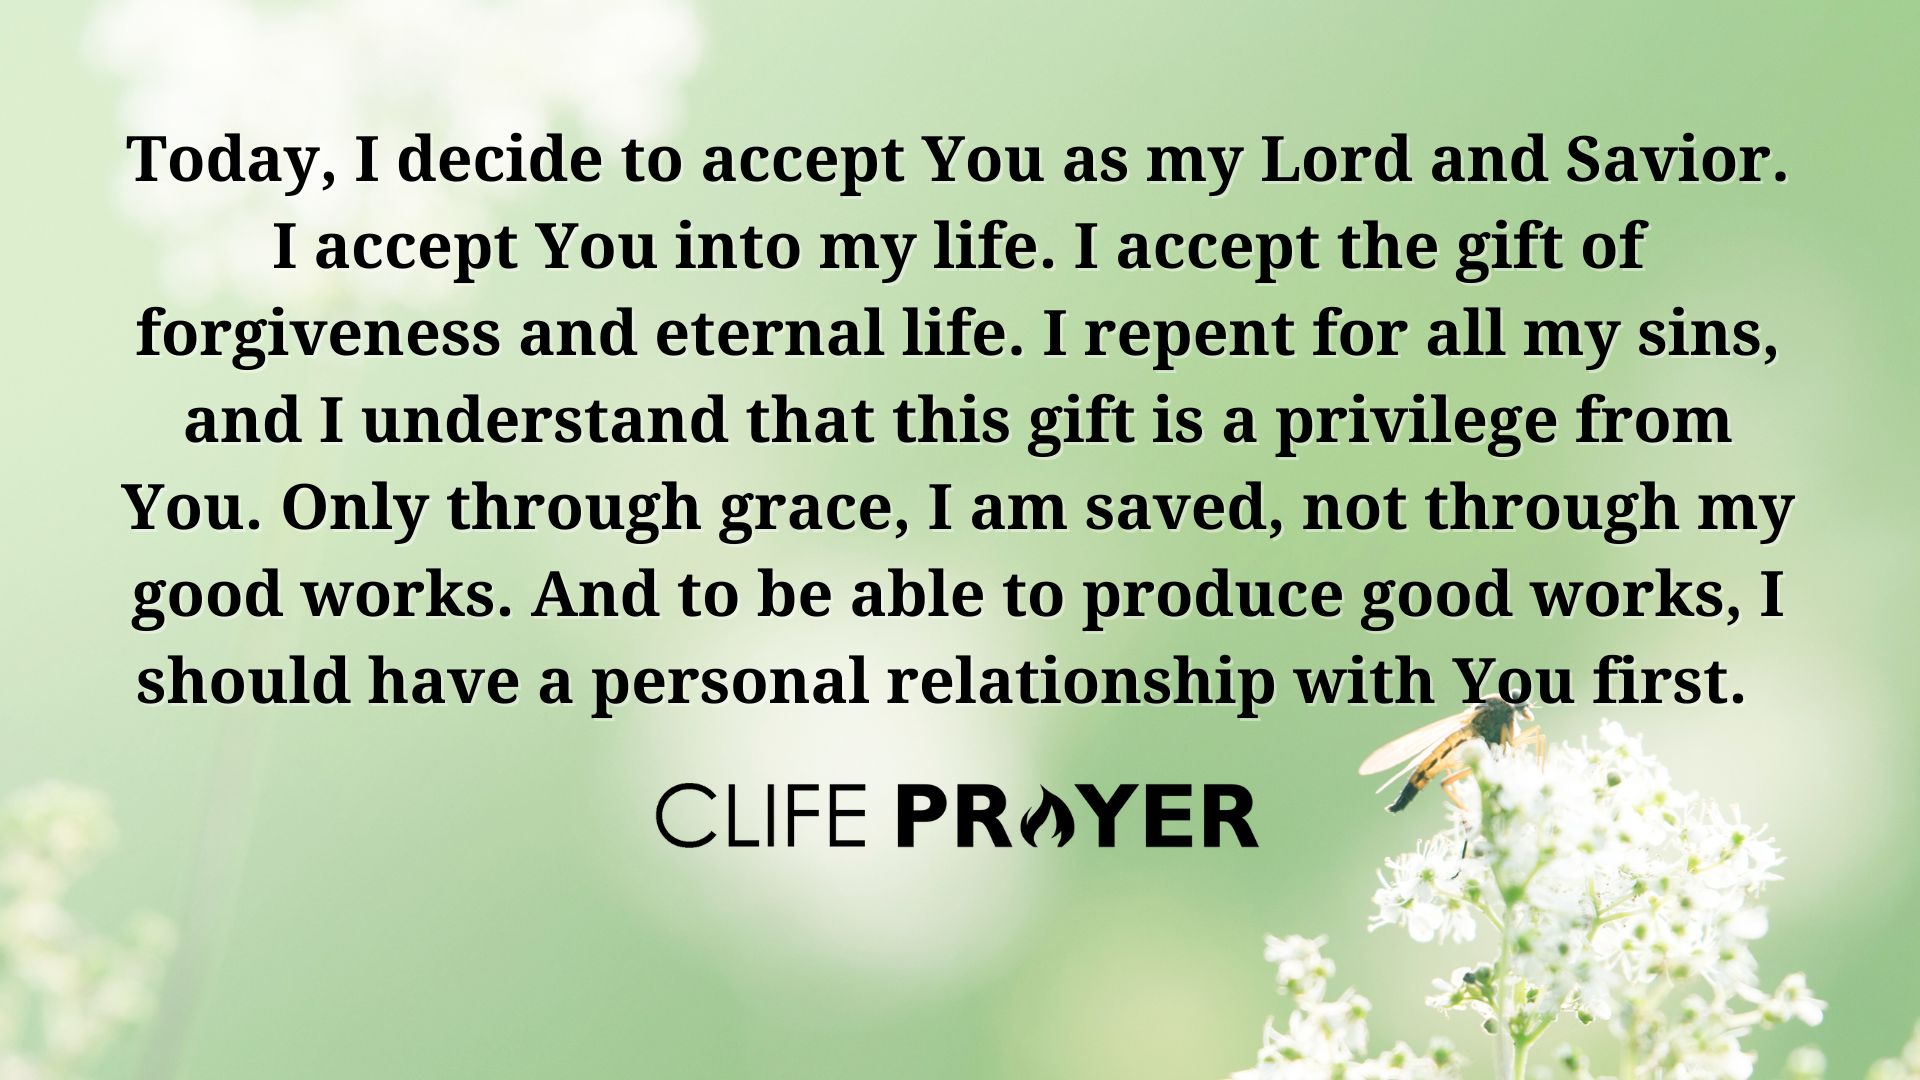 Prayer for Accepting Jesus as Lord and Savior